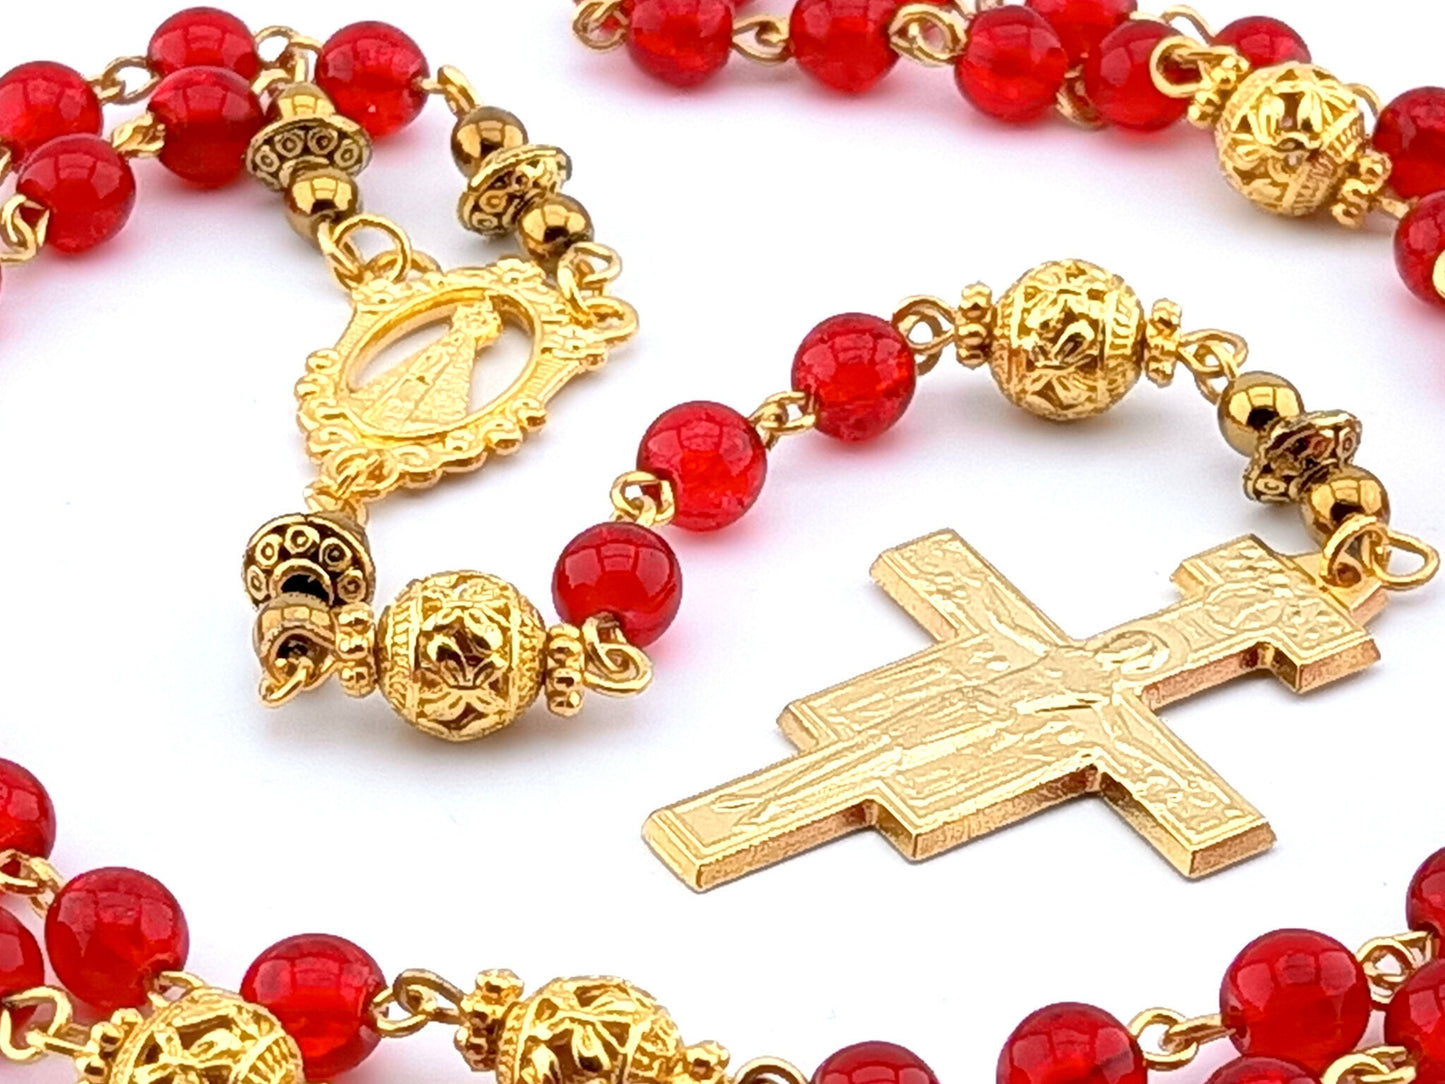 Our Lady of Loretto unique rosary beads with red glass and gold beads, golden Saint Francis crucifix and centre medal.